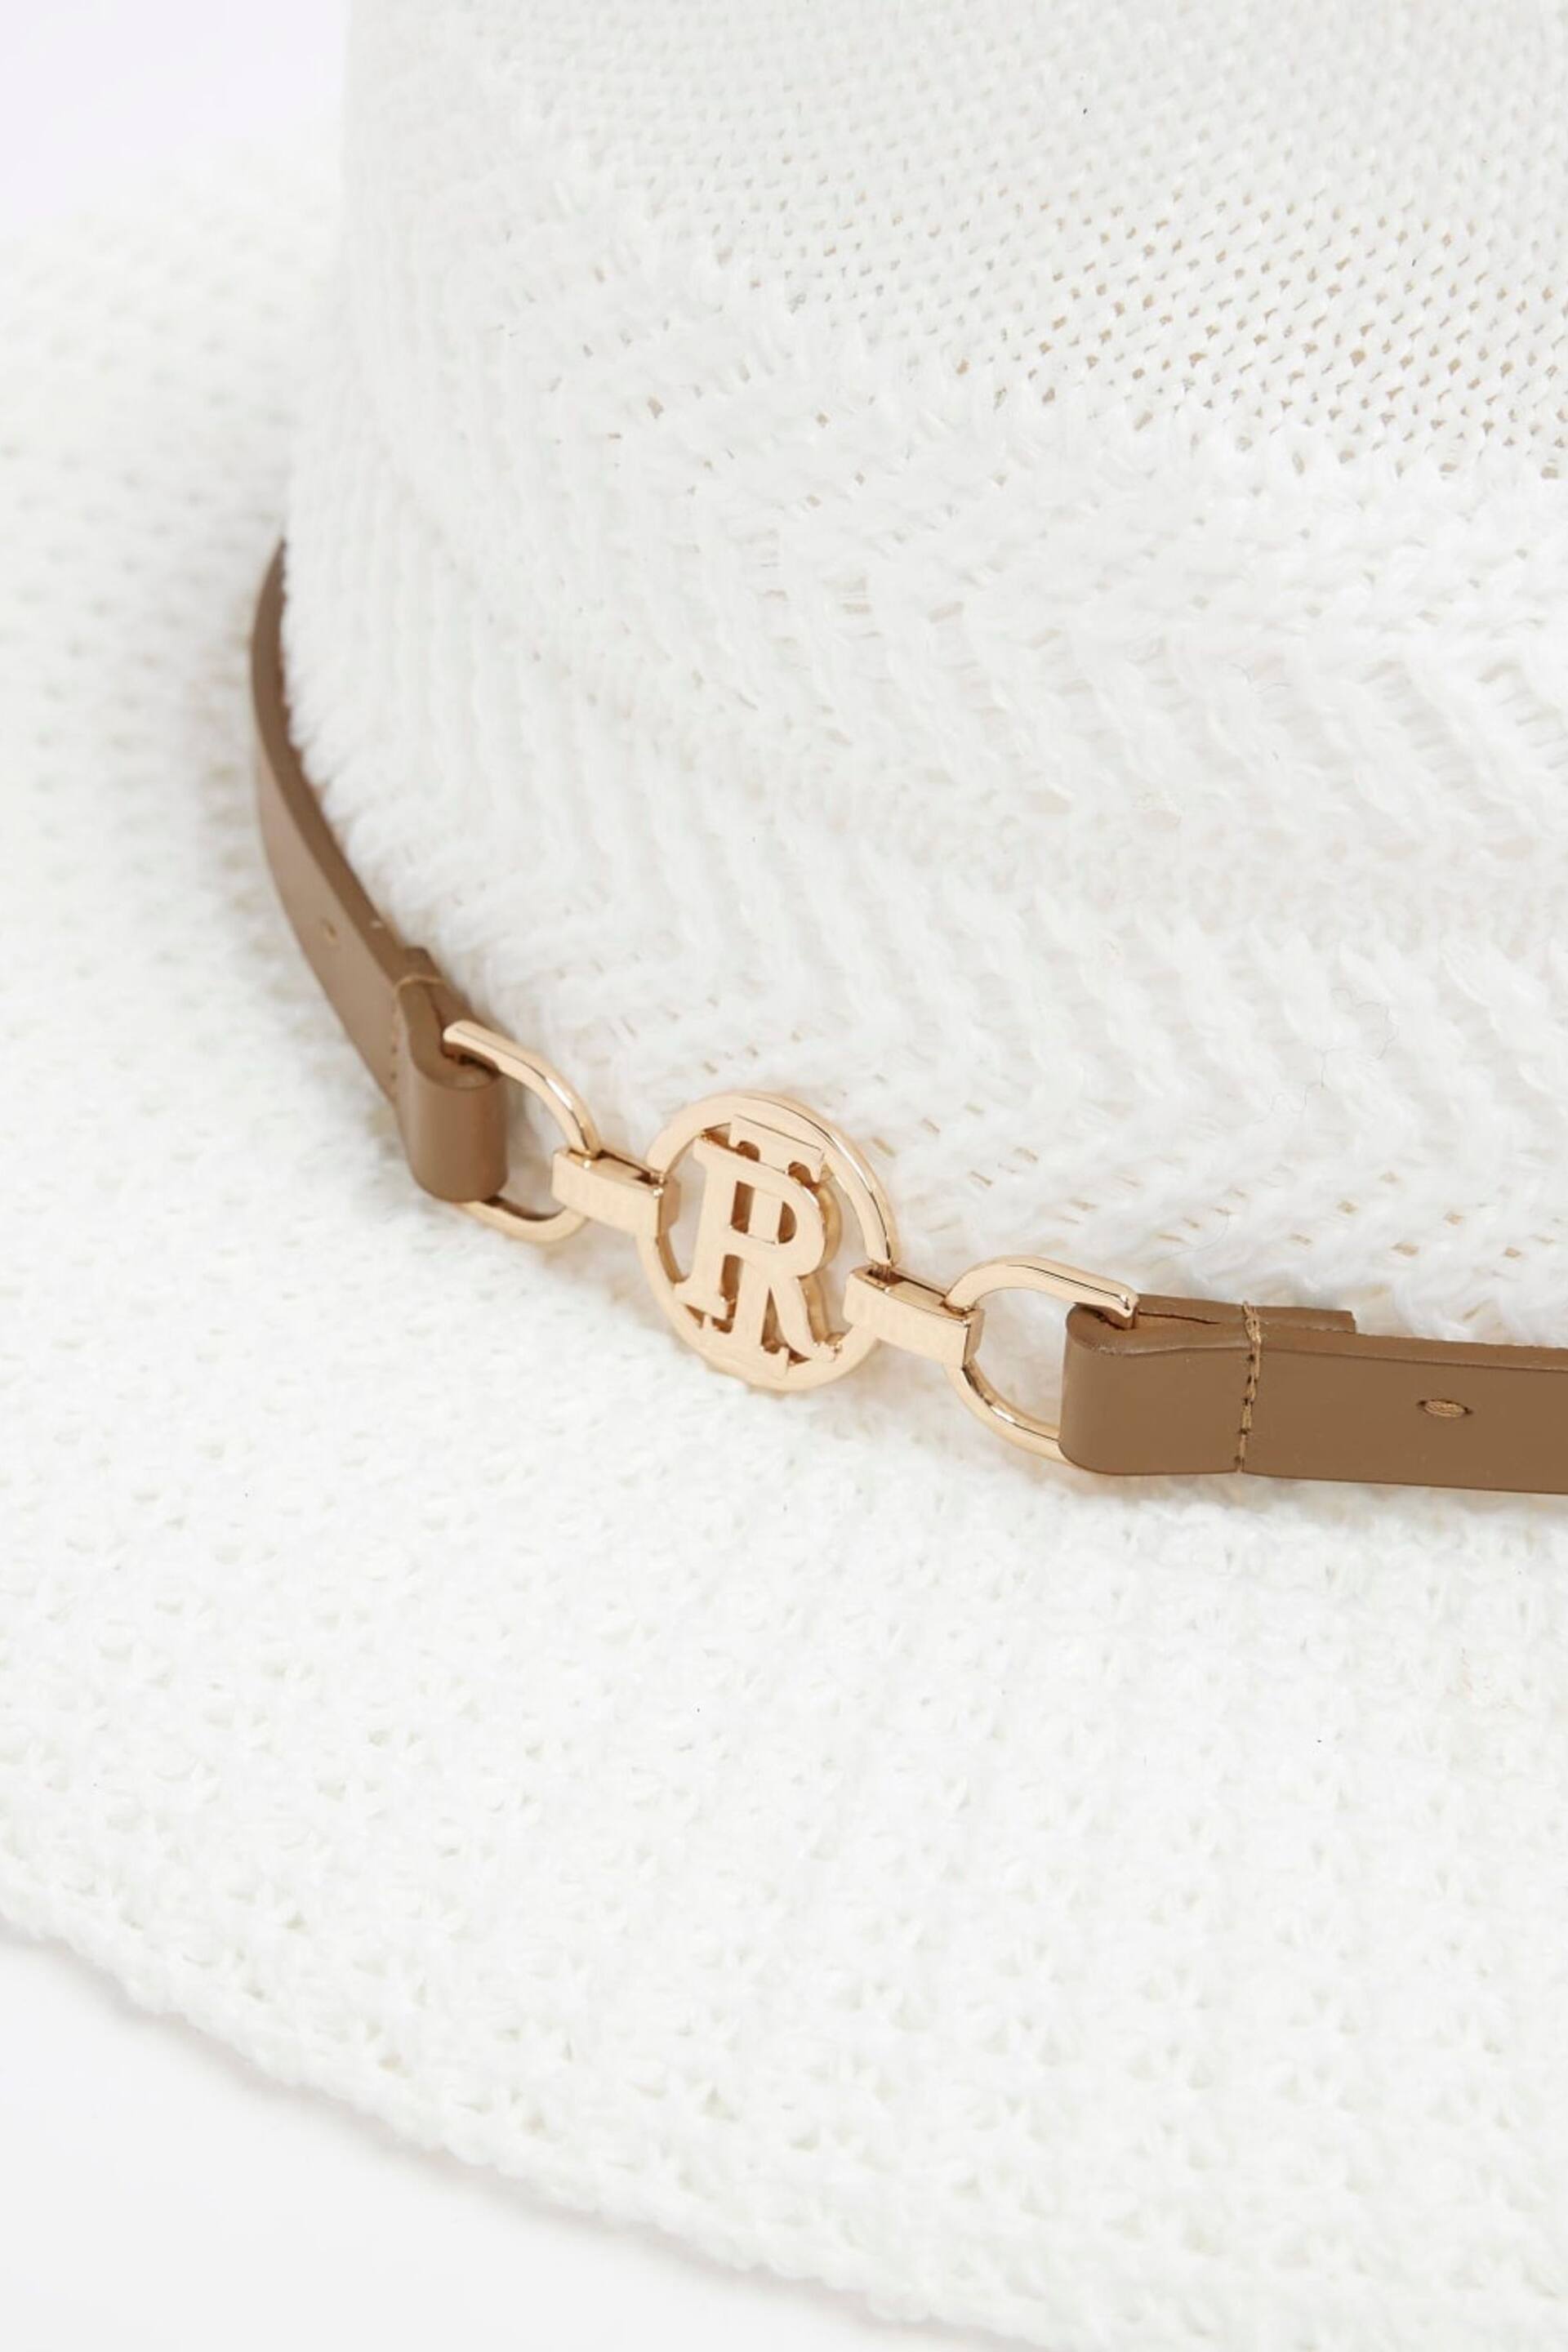 River Island White Thermo Fedora Hat - Image 4 of 4